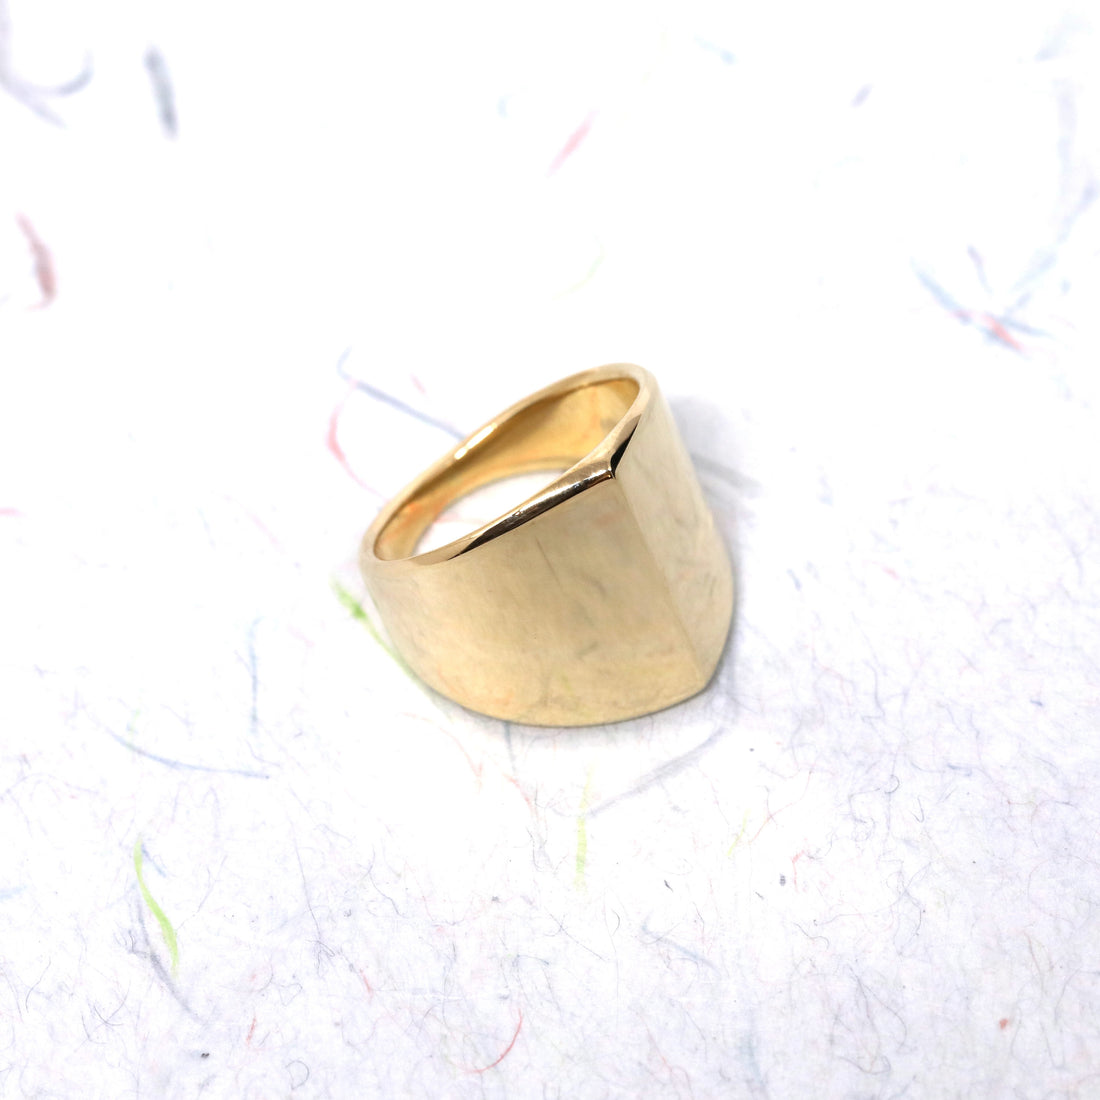 Front view of gold ring bena jewelry edgy collection fine jewelry montreal made in canada unisexe minimalist jewels designer custom made ring handmade in montreal little italy jeweler ring designer solid gold ring handmade in montreal